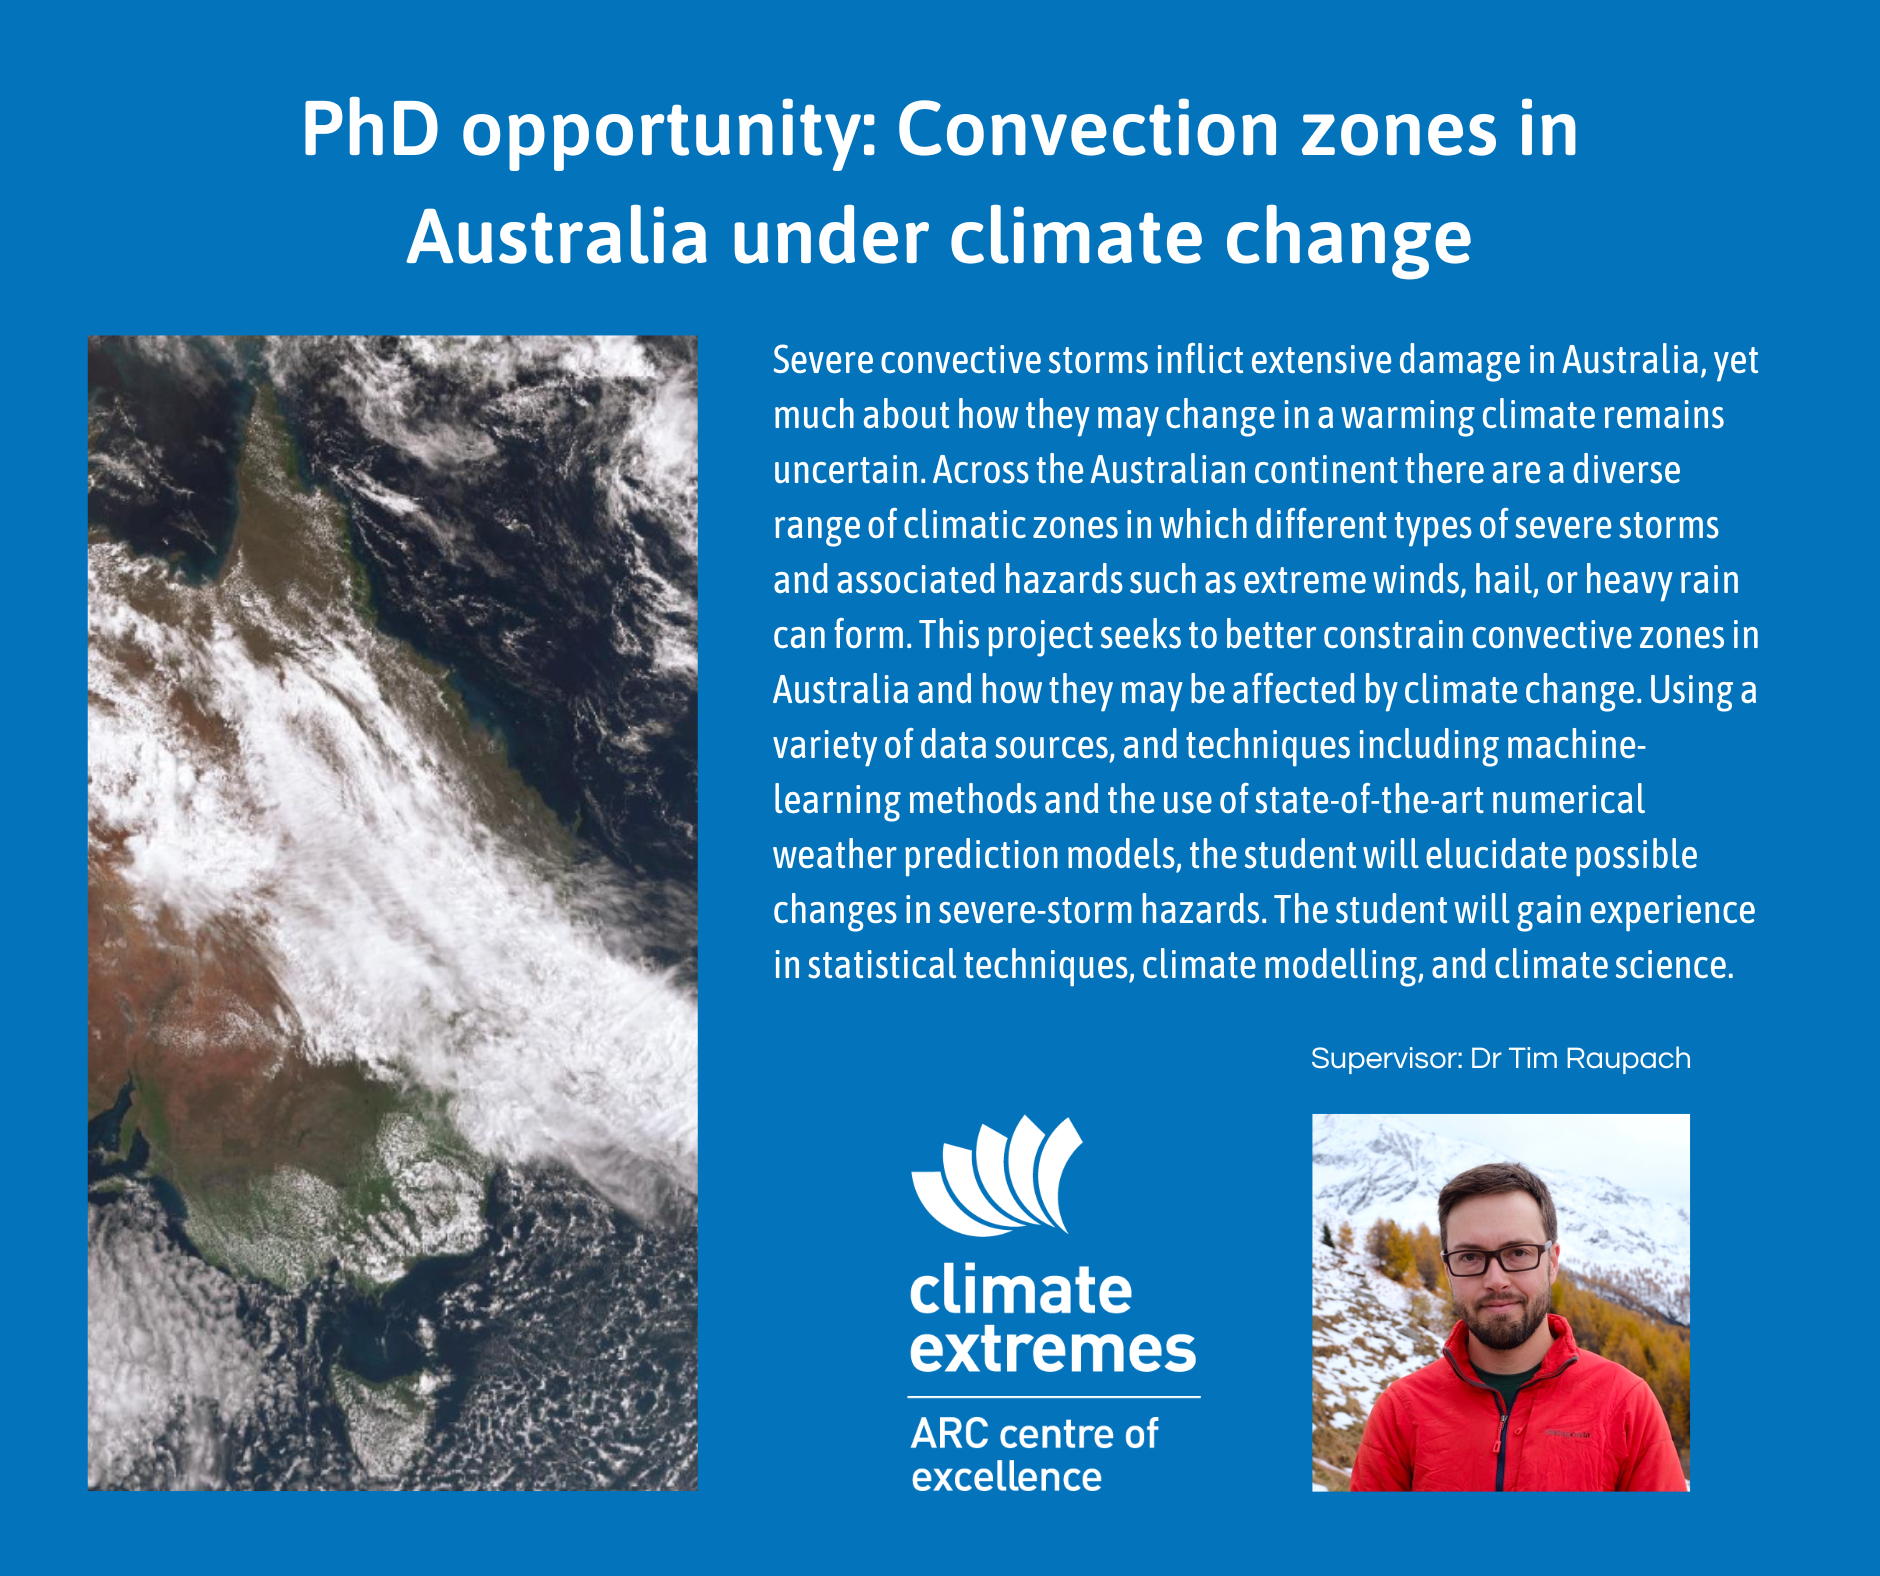 PhD opportunity: Convection zones in Australia under climate change